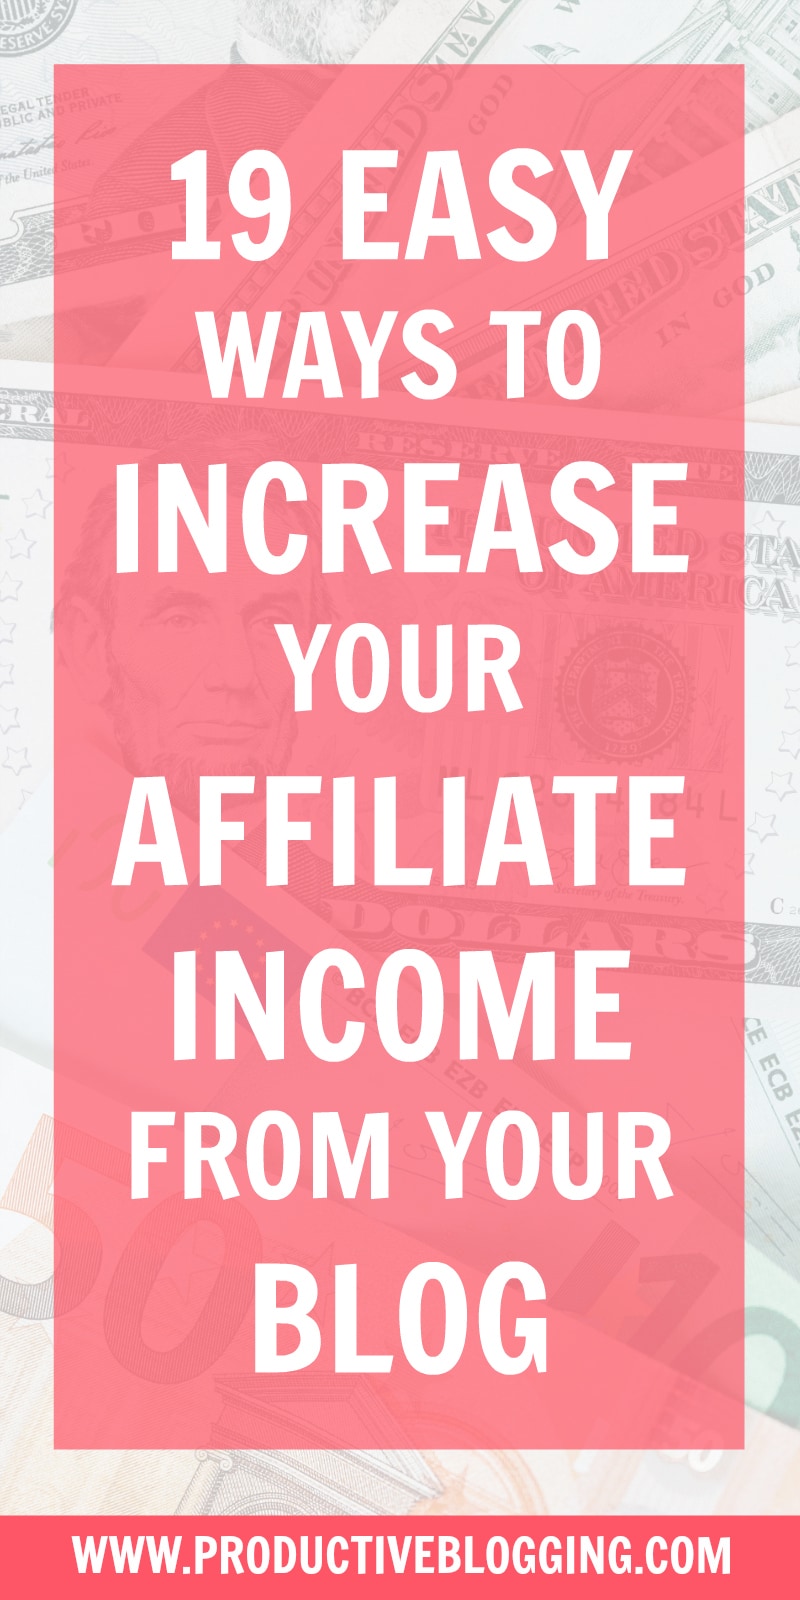 Love the sound of earning passive income from affiliate links on your blog, but can’t seem to make it work on YOUR blog? Here are 19 easy ways to increase your affiliate income! #affiliatelinks #affiliatemarketing #affiliatemarketingforbloggers #increaseaffiliateincome #makemoneyblogging #monetizeyourblog #bloggersofIG #professionalblogger #bloggingismyjob #solopreneur #mompreneur #fempreneur #bloggingbiz #bloggingtips #productivitytips #productivebloggingcommunity #productiveblogging